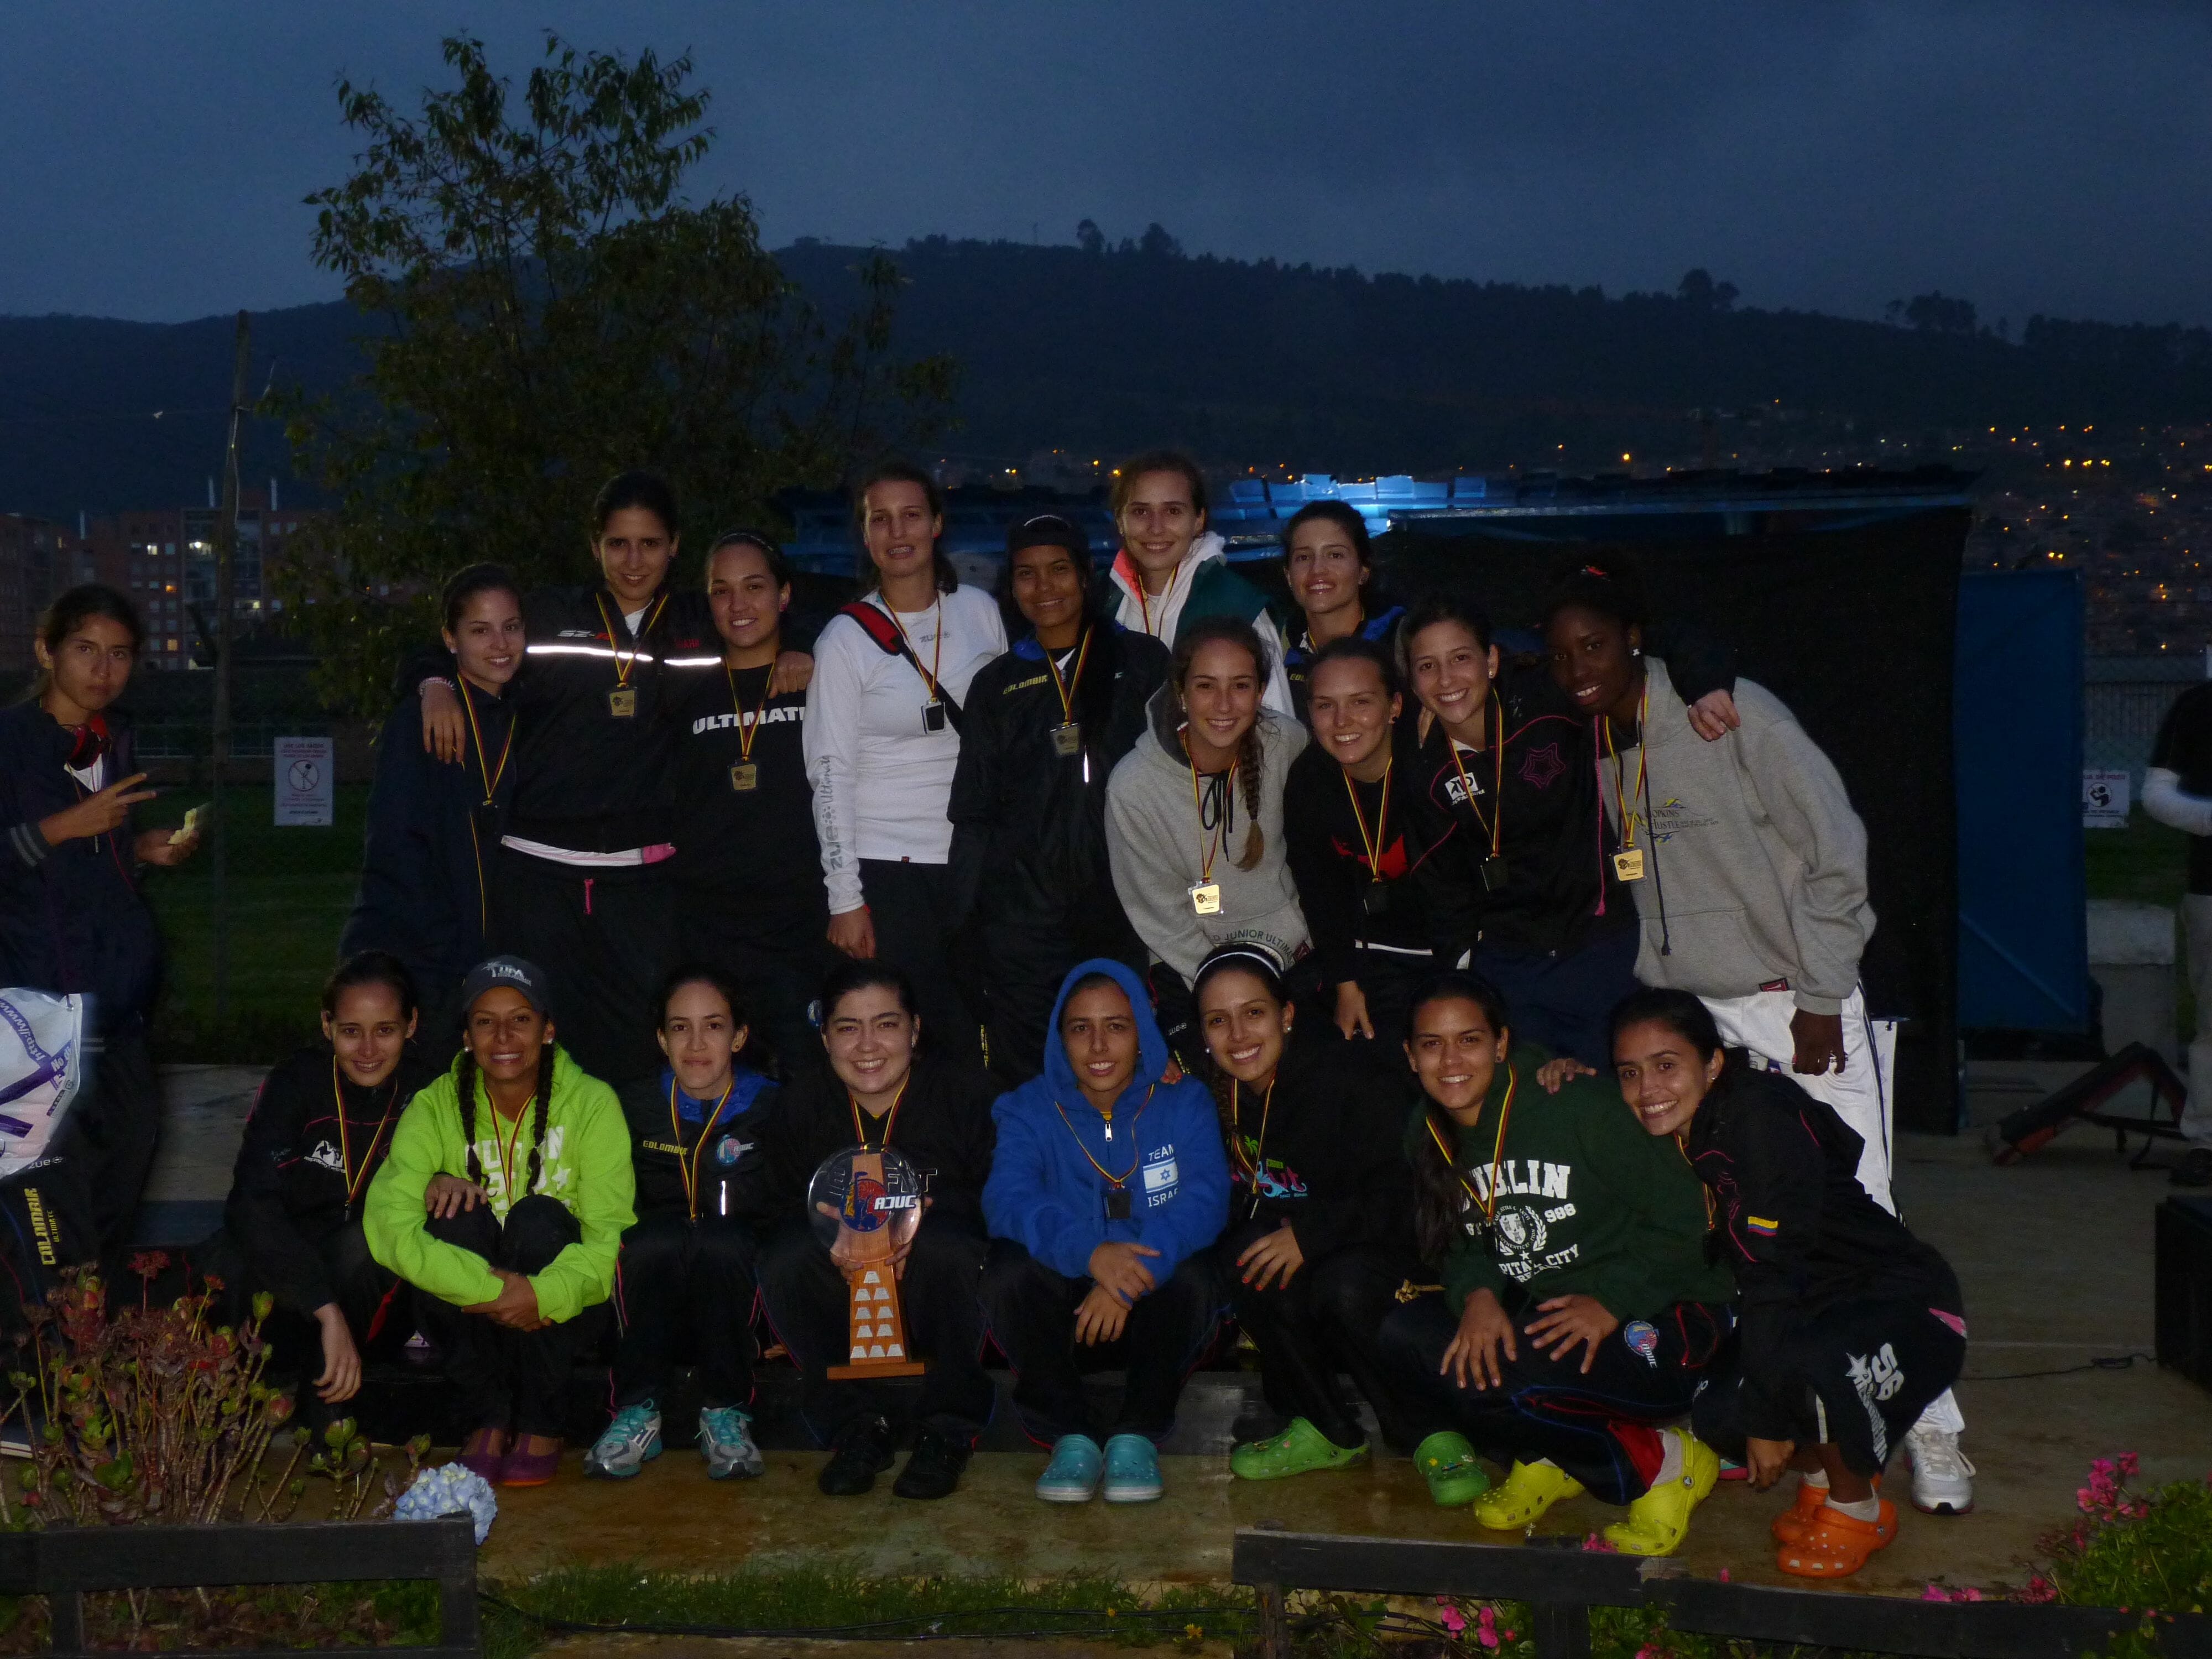 Medellin's Revolution poses for a picture after winning the 2012 AJUC Colombian Nationals.